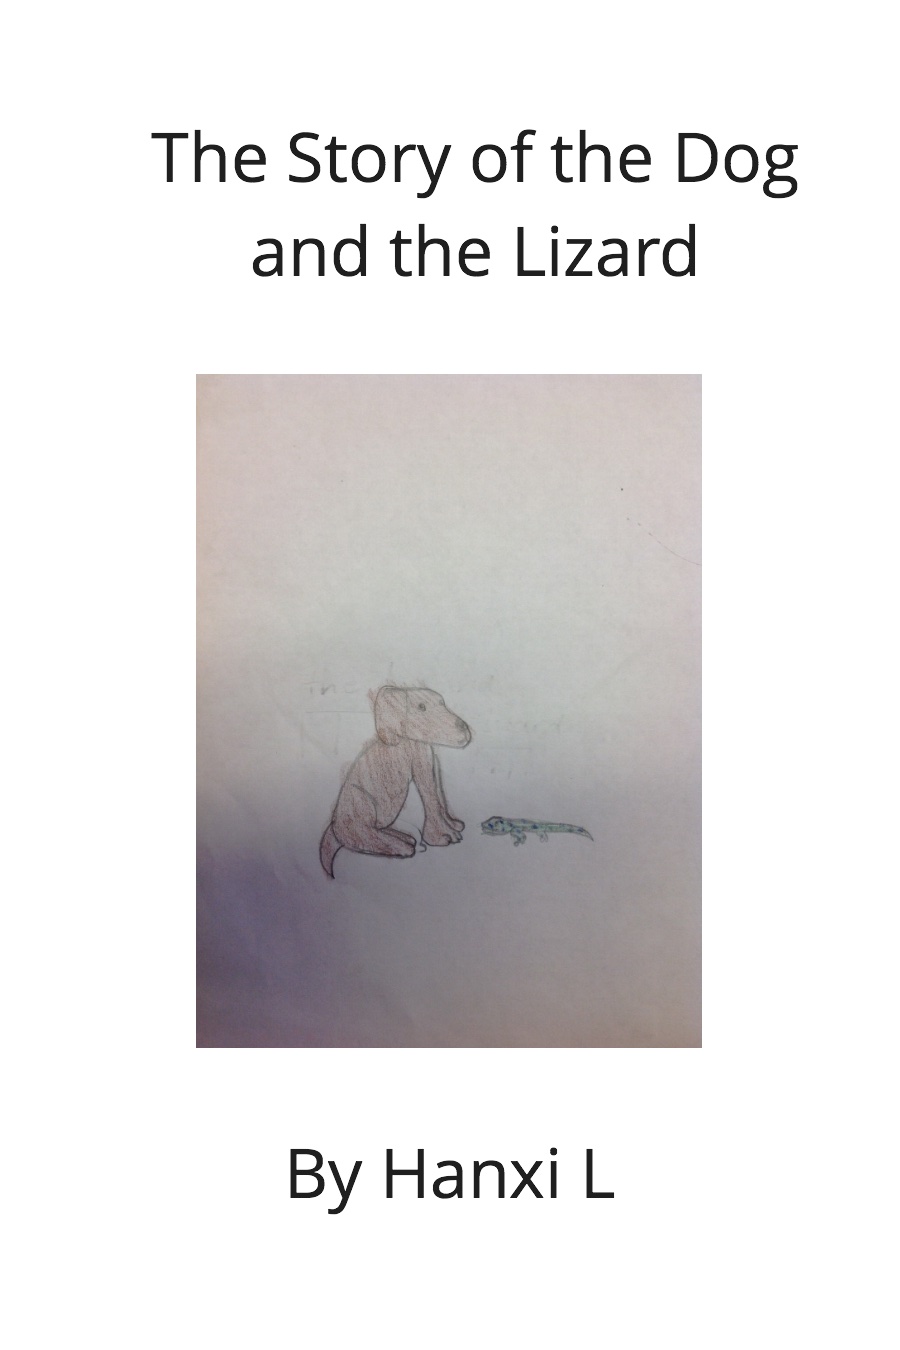 The Story of the Dog and the Lizard by Hanxi L